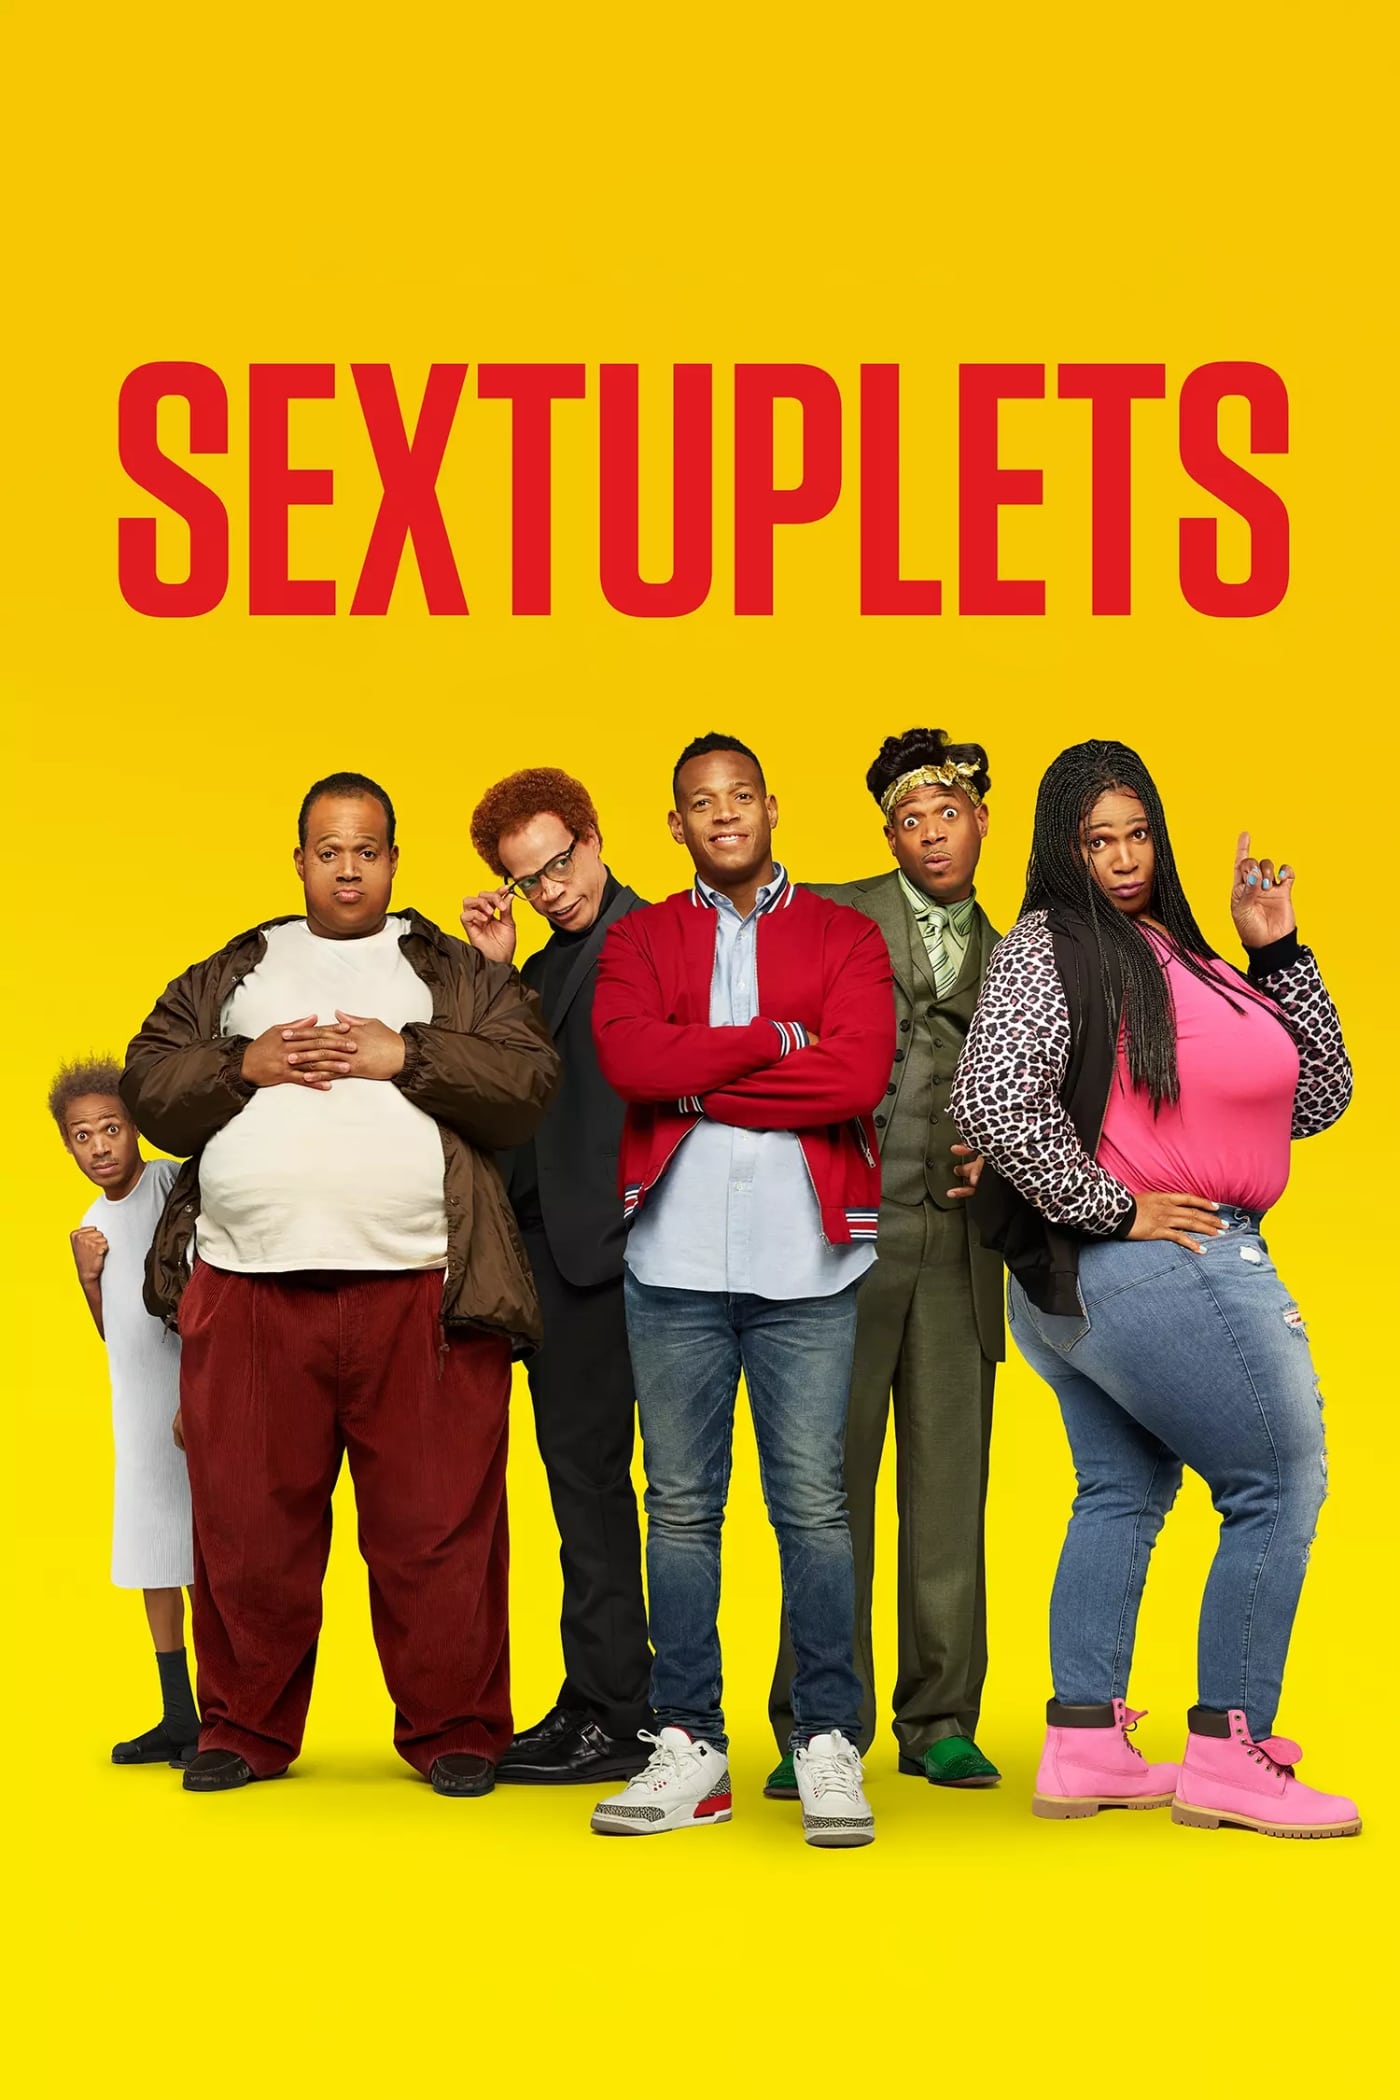 Sextuplets poster